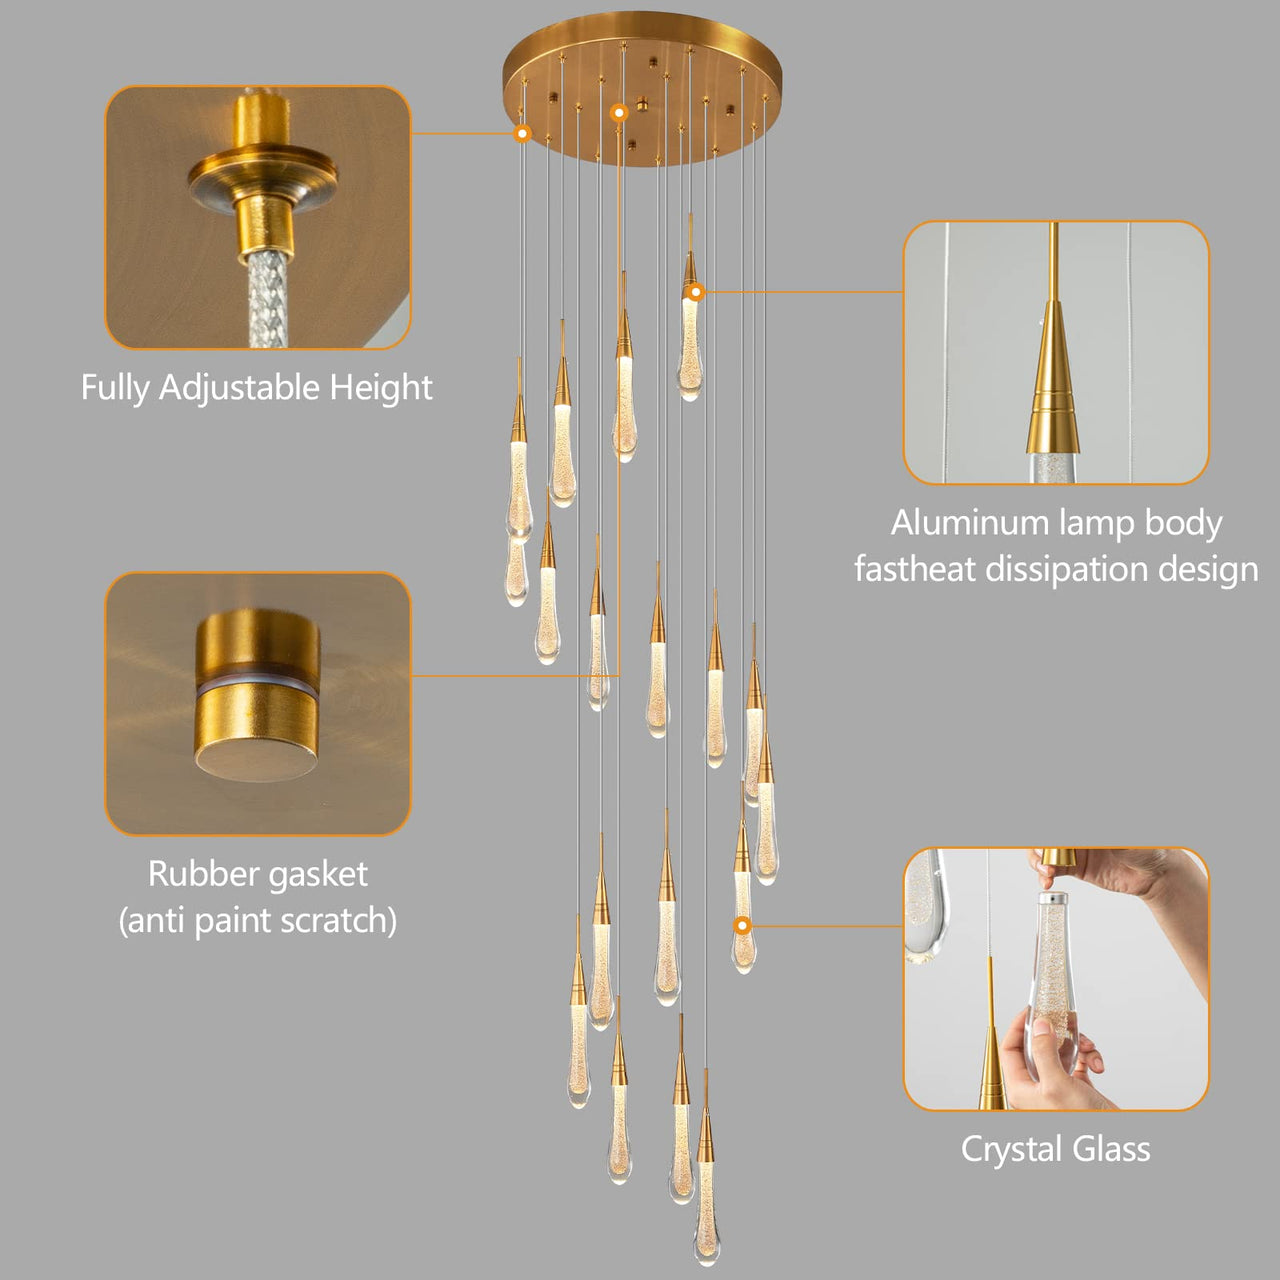 Contemporary design for staircase lighting 